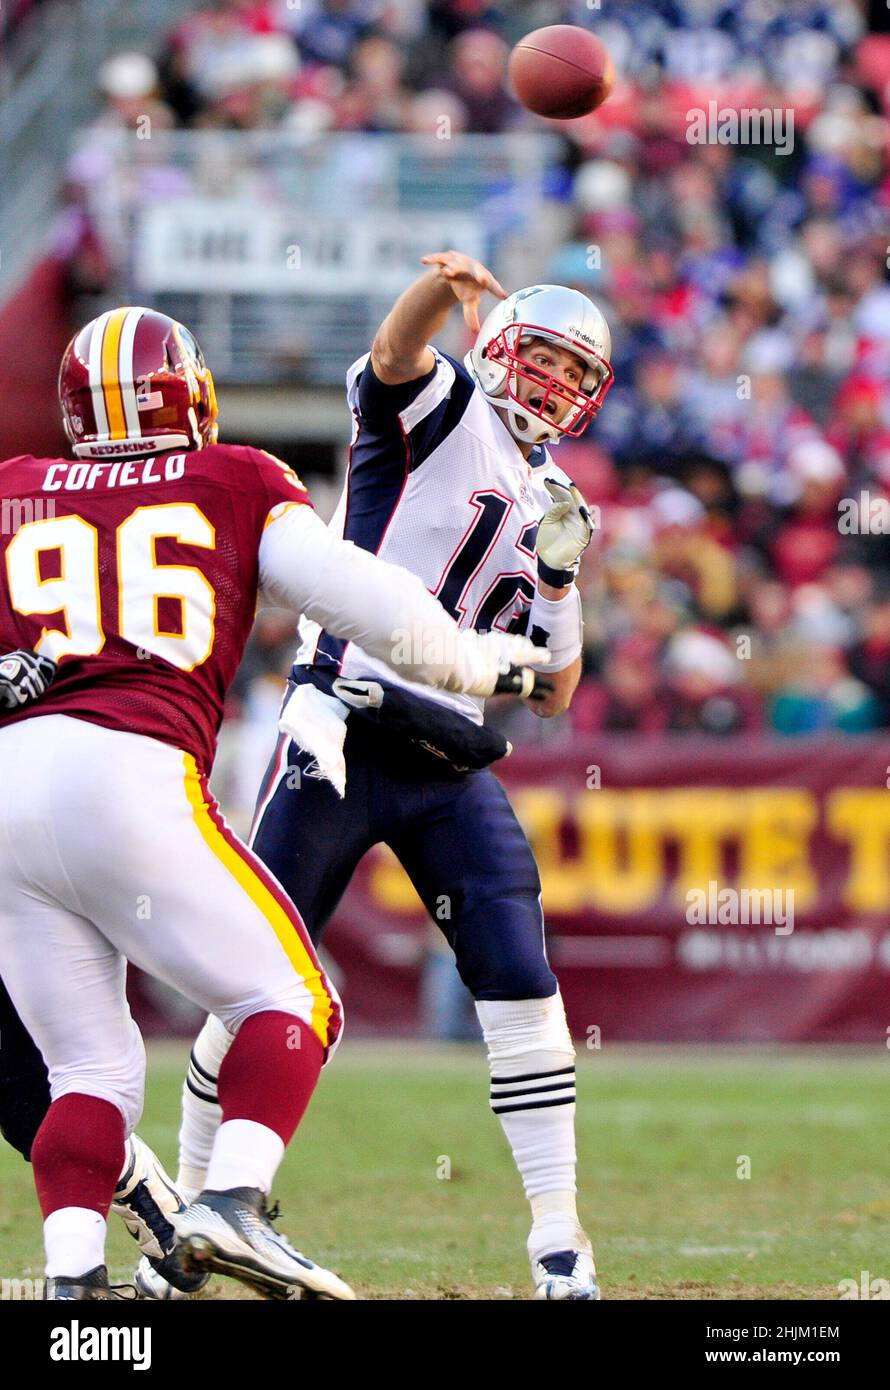 New England Patriots quarterback Tom Brady (12) passes over Washington  Redskins nose tackle Barry Cofield (96) in fourth quarter action at FedEx  Field in Landover, Maryland on Sunday December 11, 2011. The